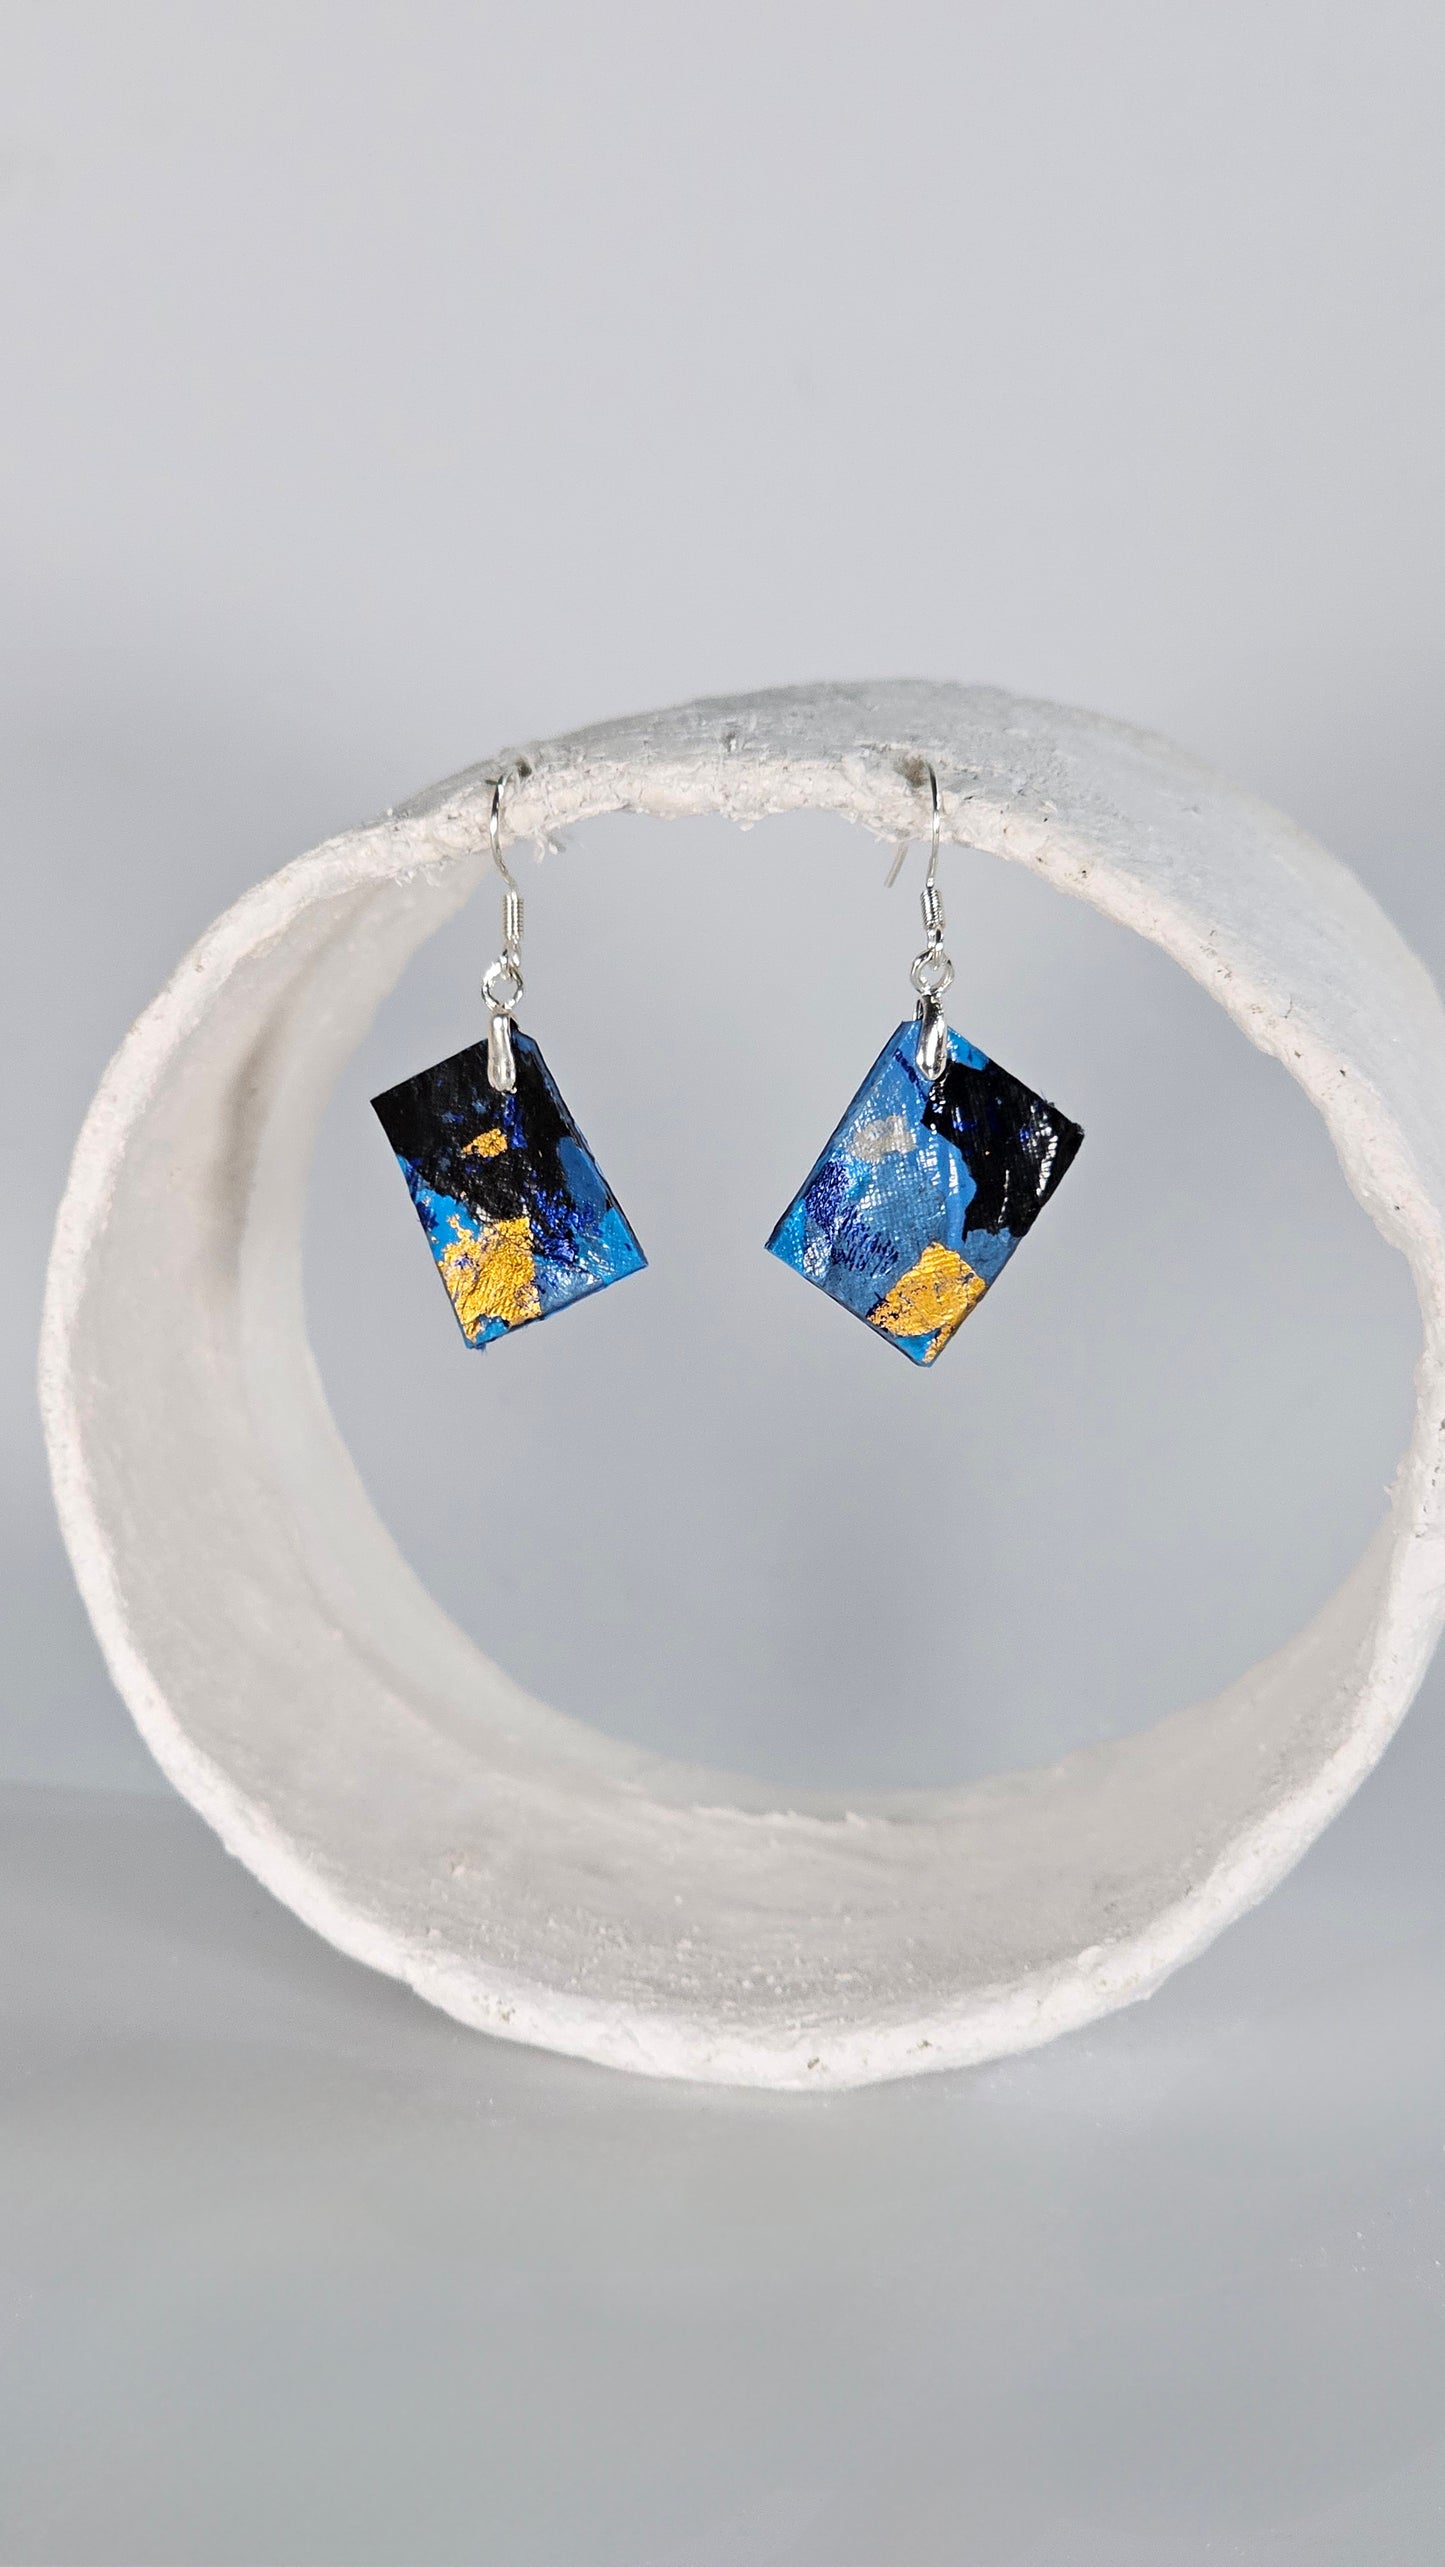 S rectangular shaped earrings in metallic gold and blue- S/S 24 - PLASTIQUE By Siân